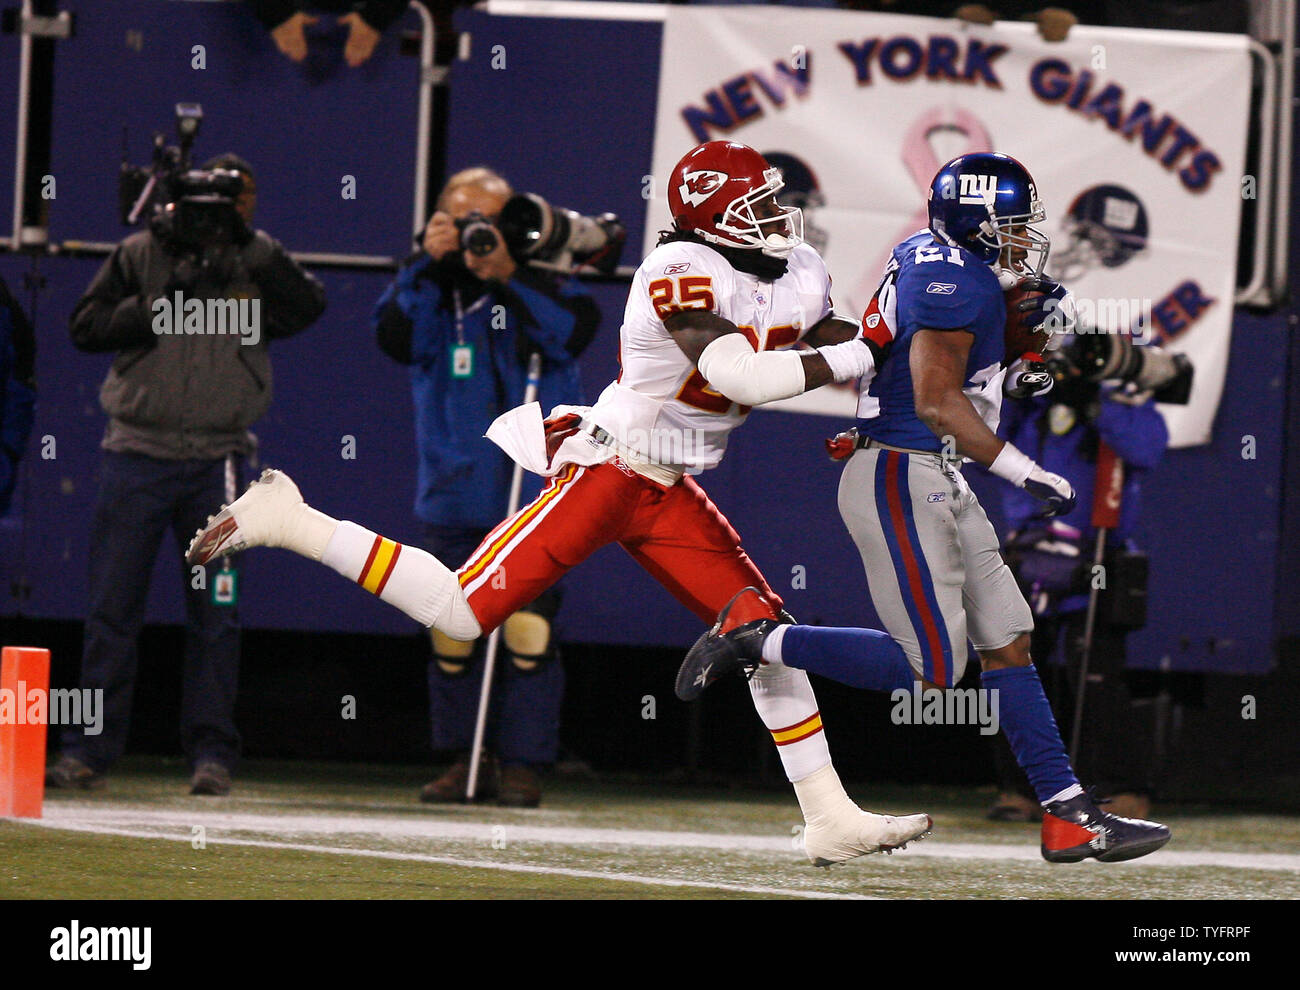 New York Giants runningback Tiki Barber scores the first touchdown of the  game in week 15 at Giants Stadium in East Rutherford, New Jersey on  December 17, 2005. The New York Giants